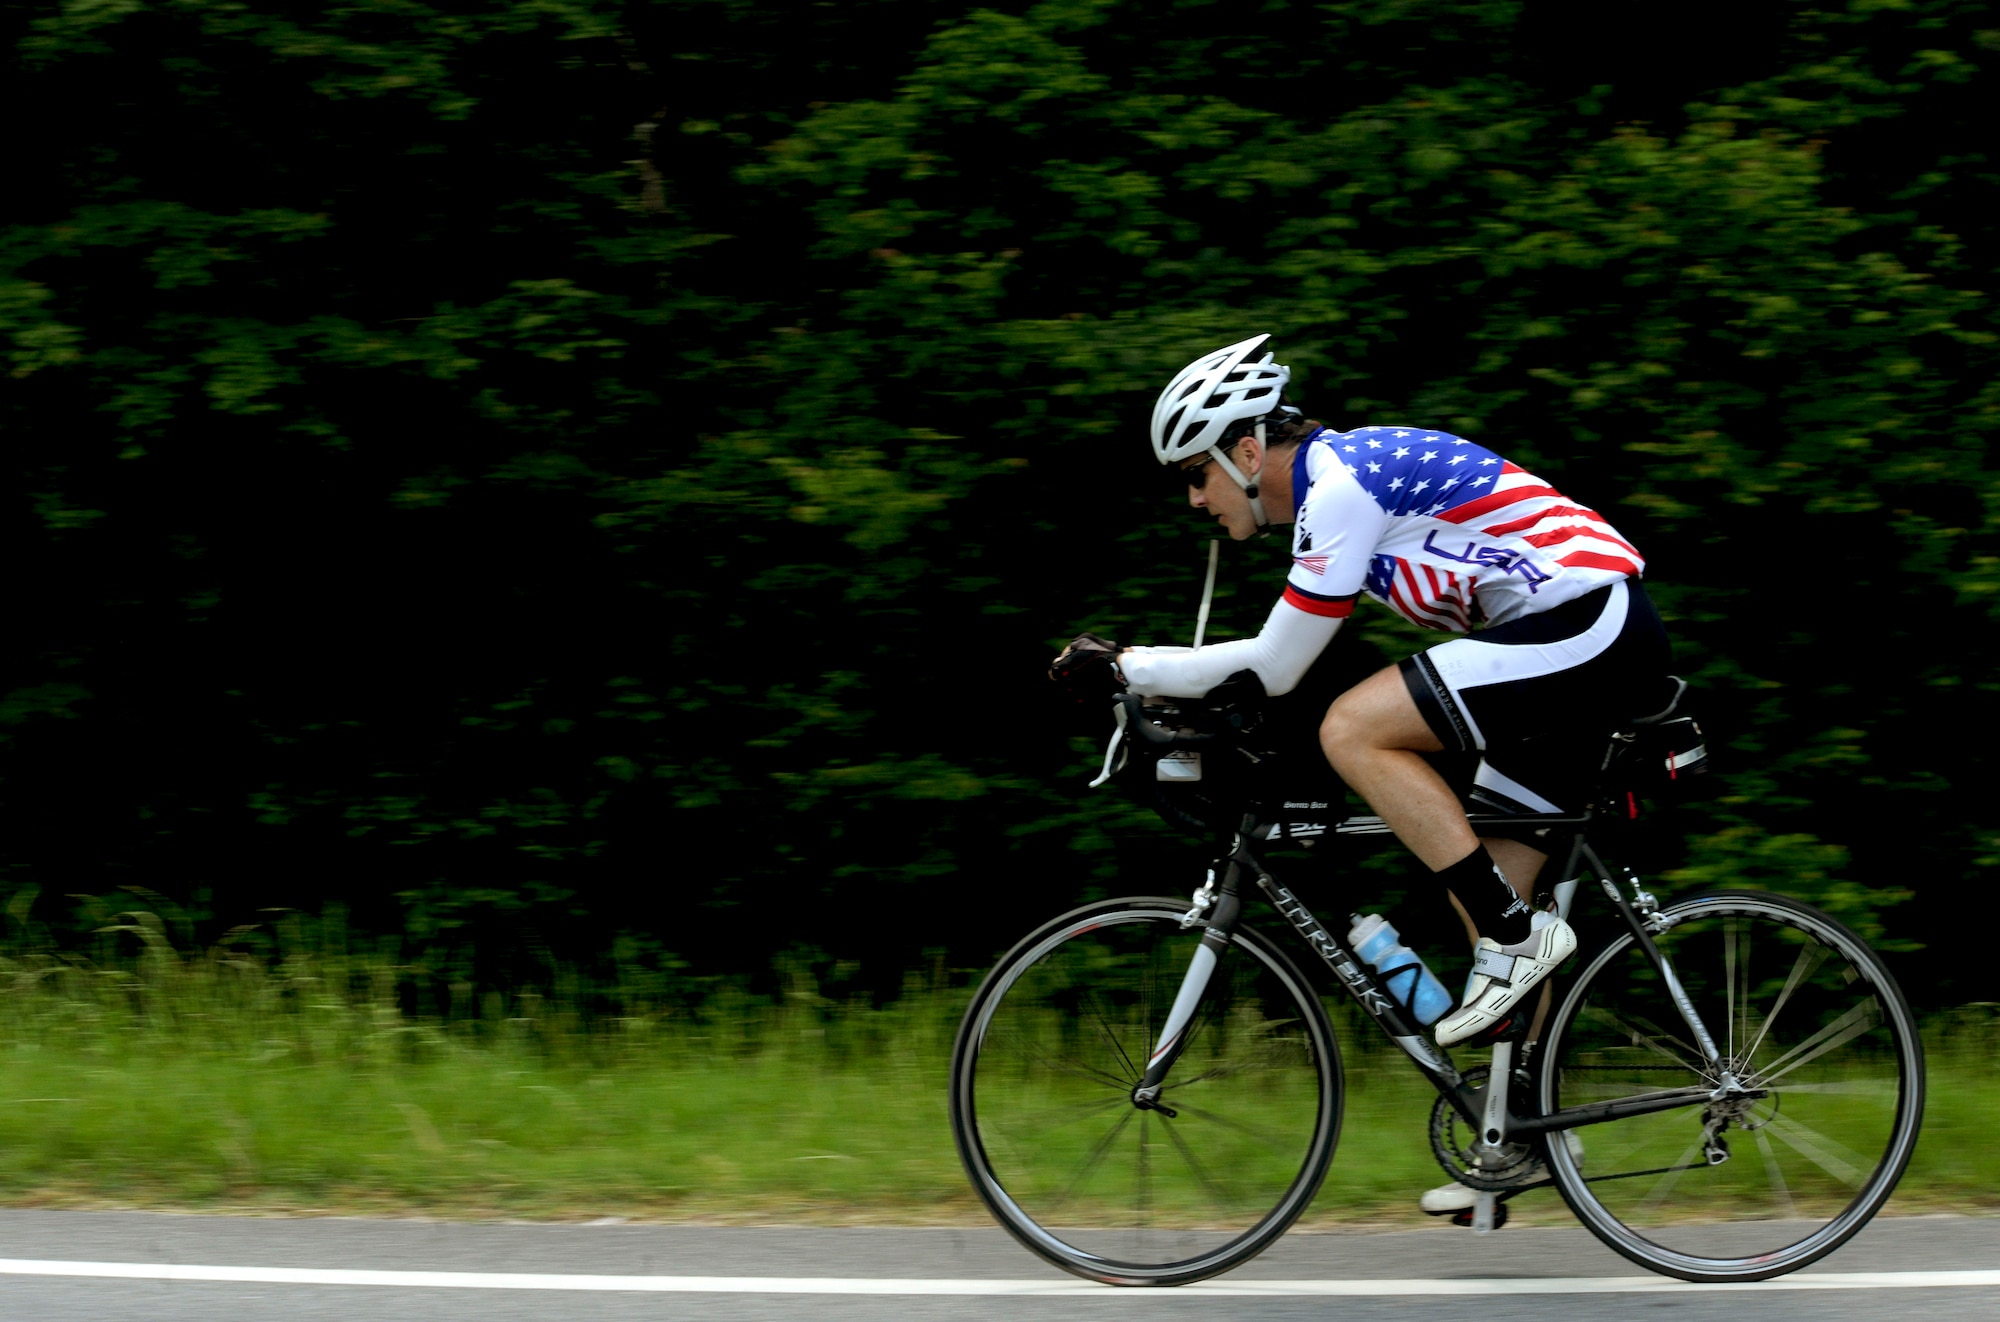 HAHIRA, Ga. -- Jason Rogers, Air Force veteran, rides his bicycle through Hahira, Ga., May 2. Mr. Rogers rode his bicycle 2,500 miles across the United States to raise money for the Wounded Warrior Project. (U.S. Air Force photo/Airman 1st Class Jarrod Grammel)(RELEASED)